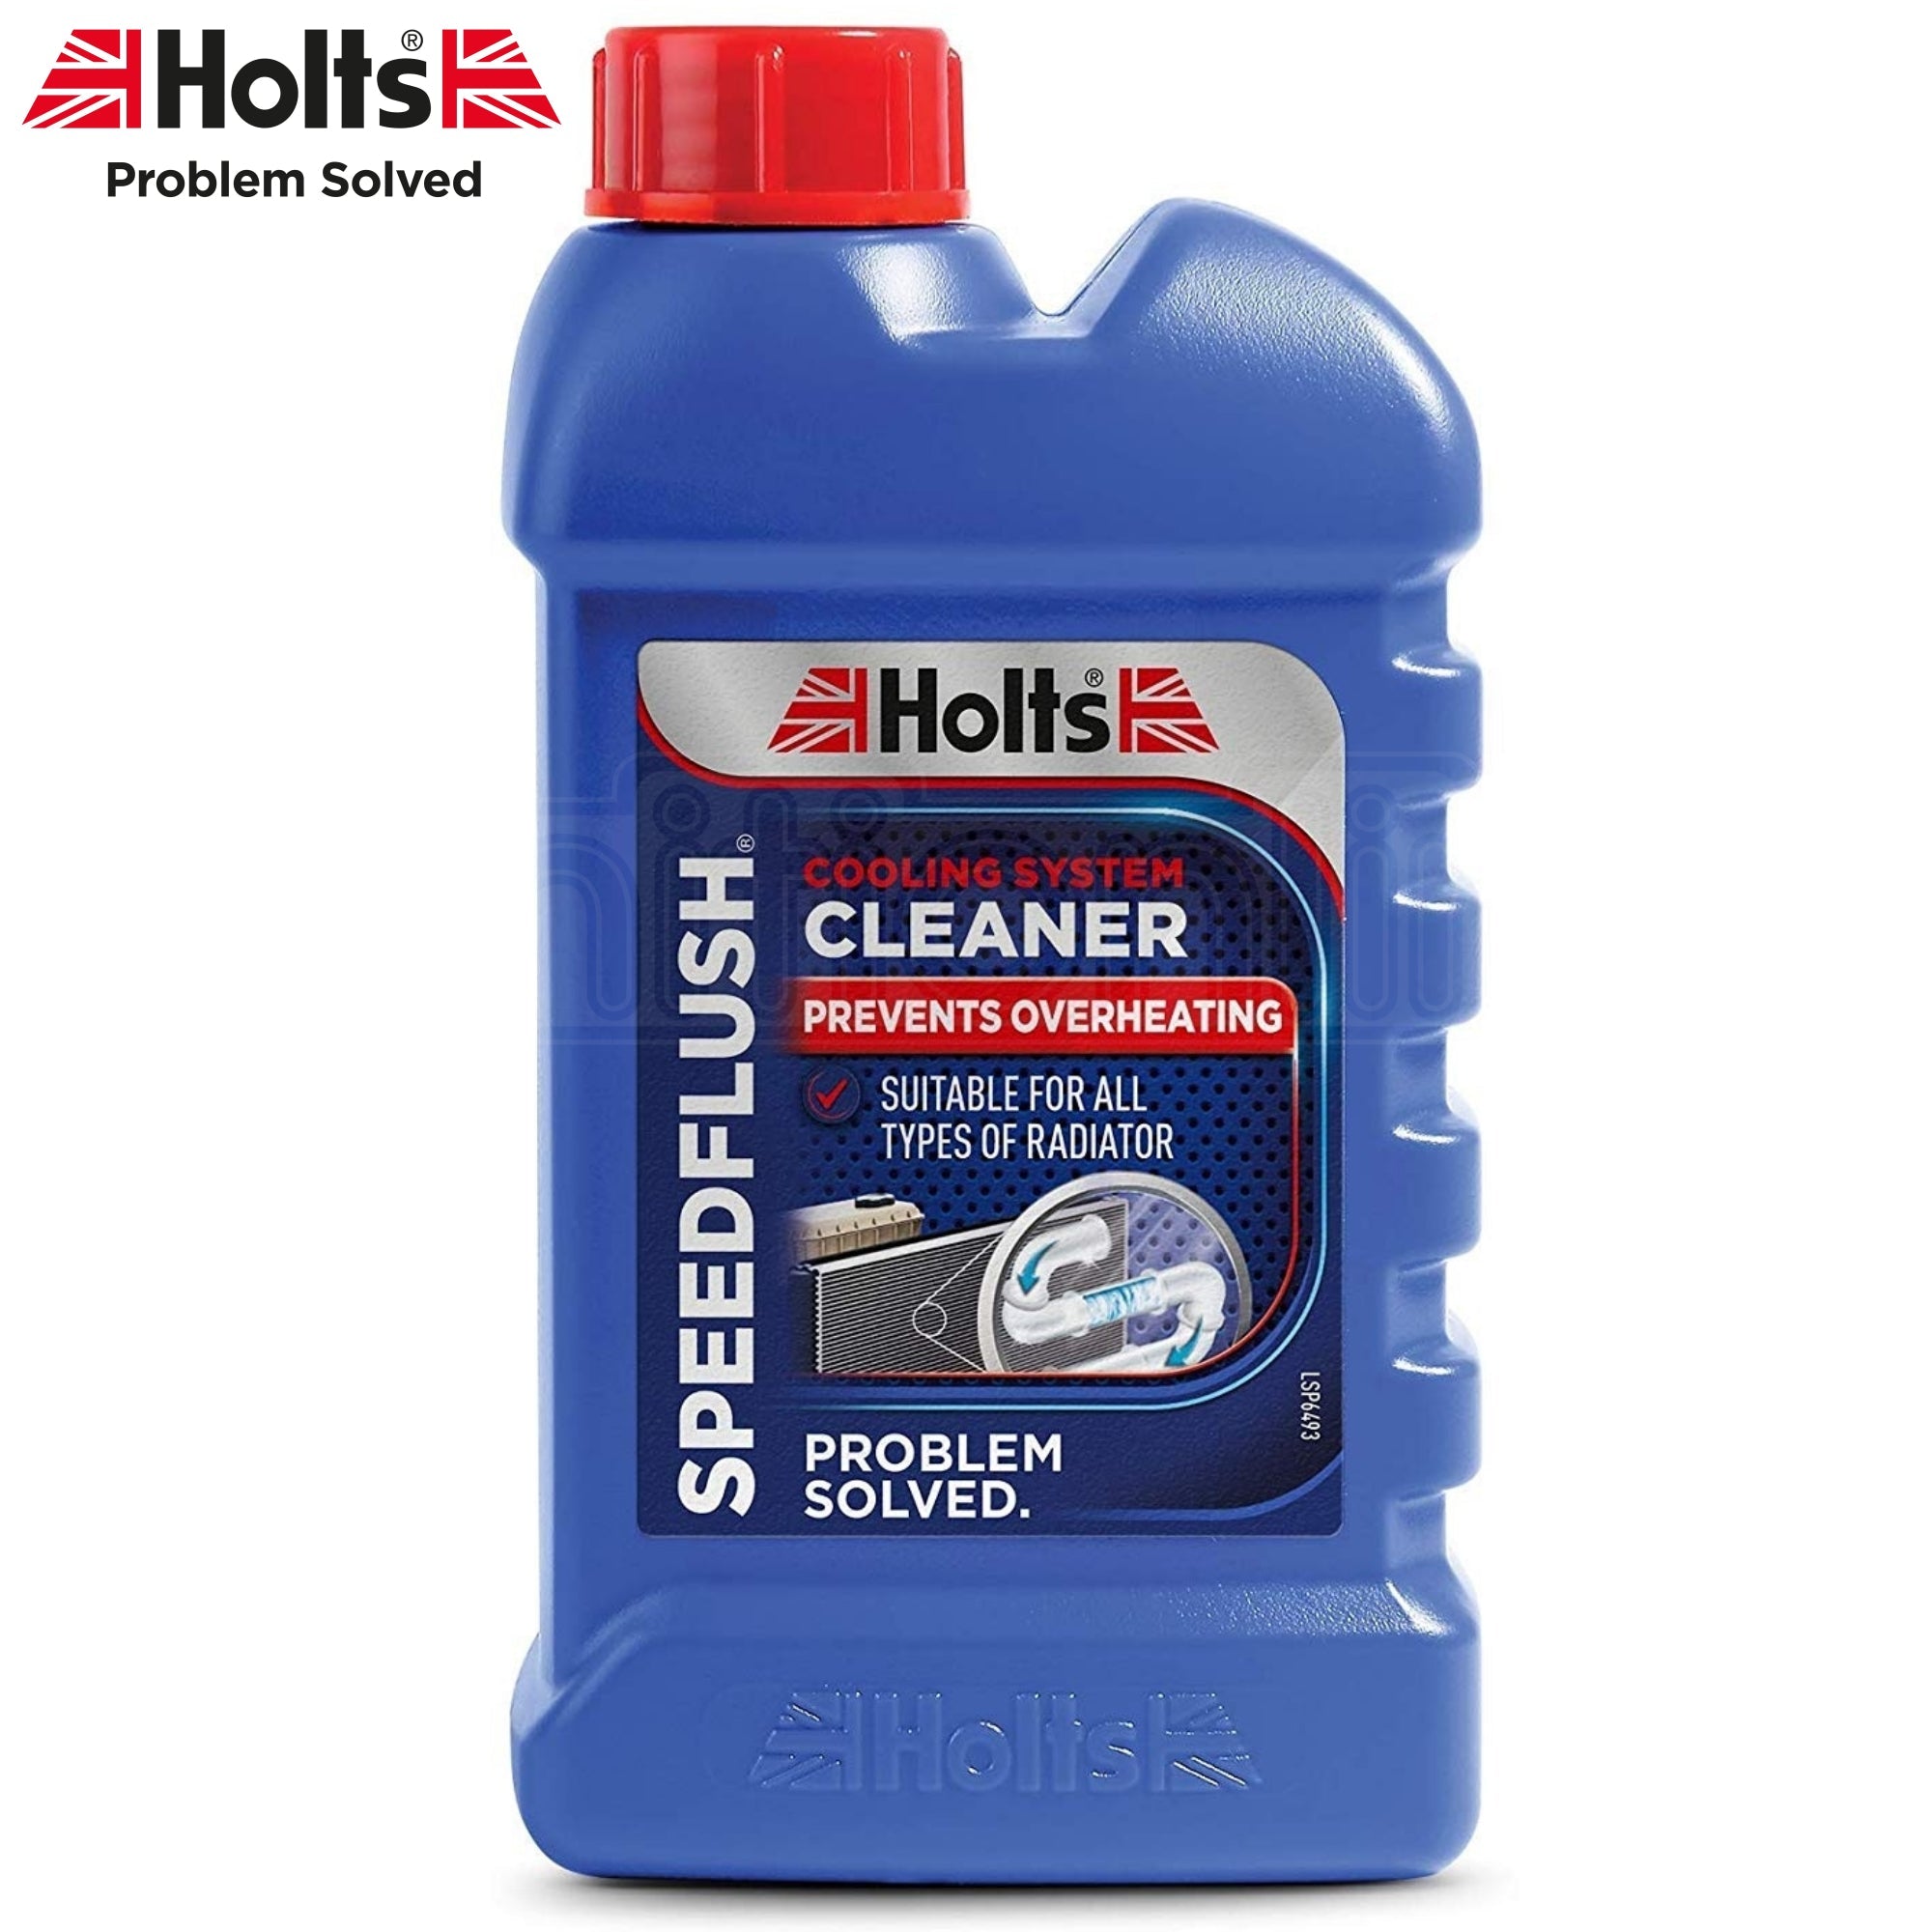 Holts Speedflush Cooling System Cleaner 250ml